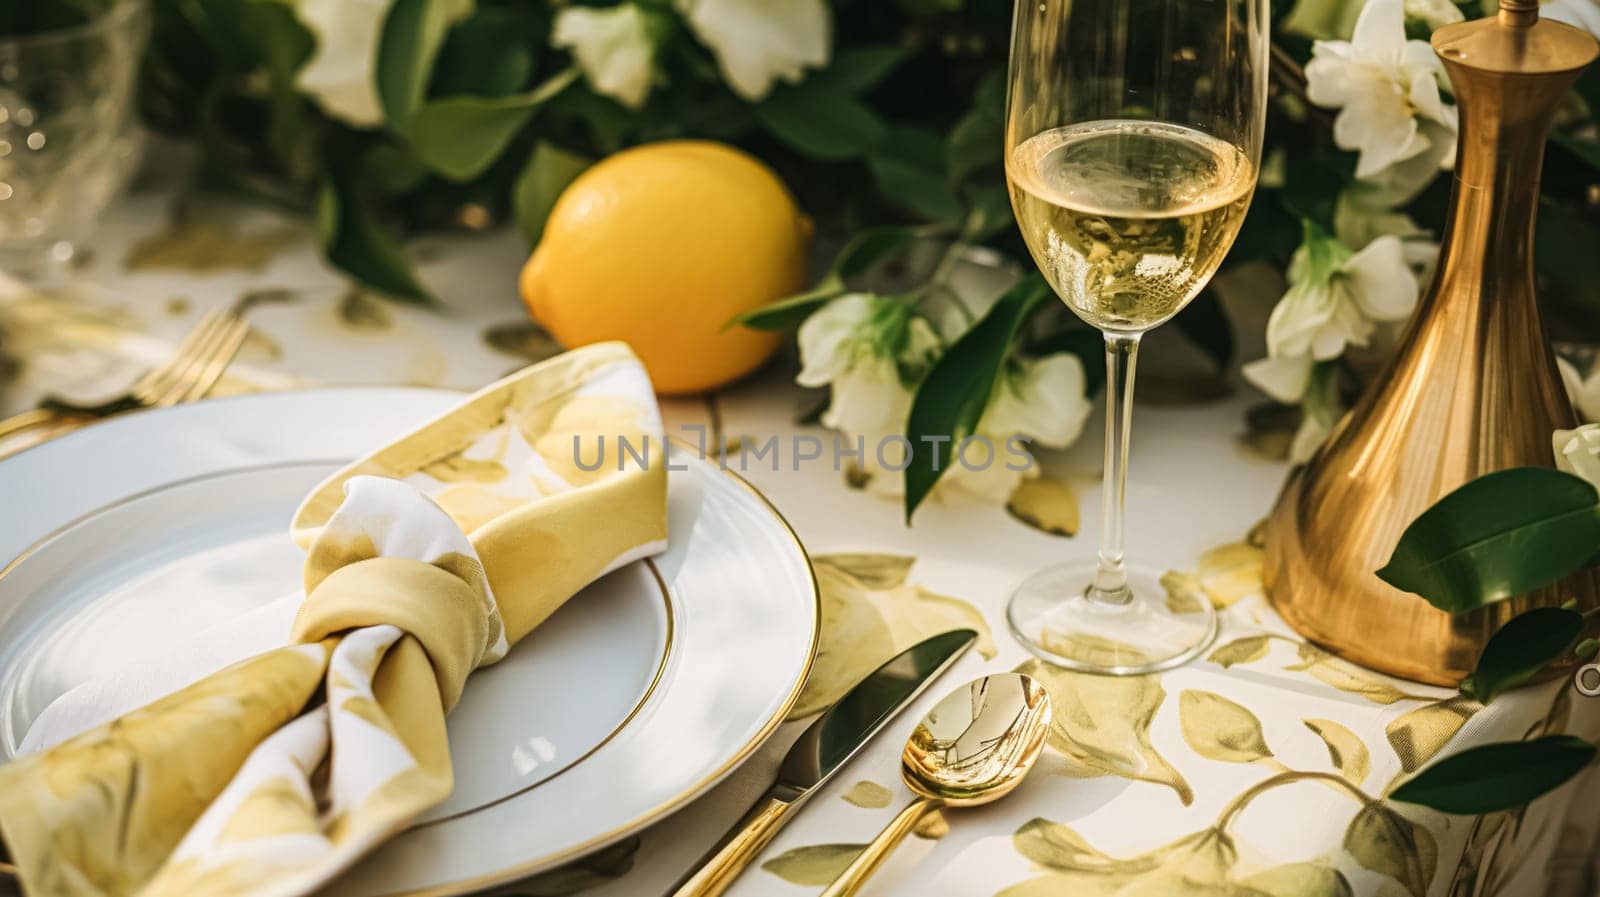 Wedding or formal dinner holiday celebration tablescape with lemons and flowers in the English countryside garden lemon tree, home styling by Anneleven